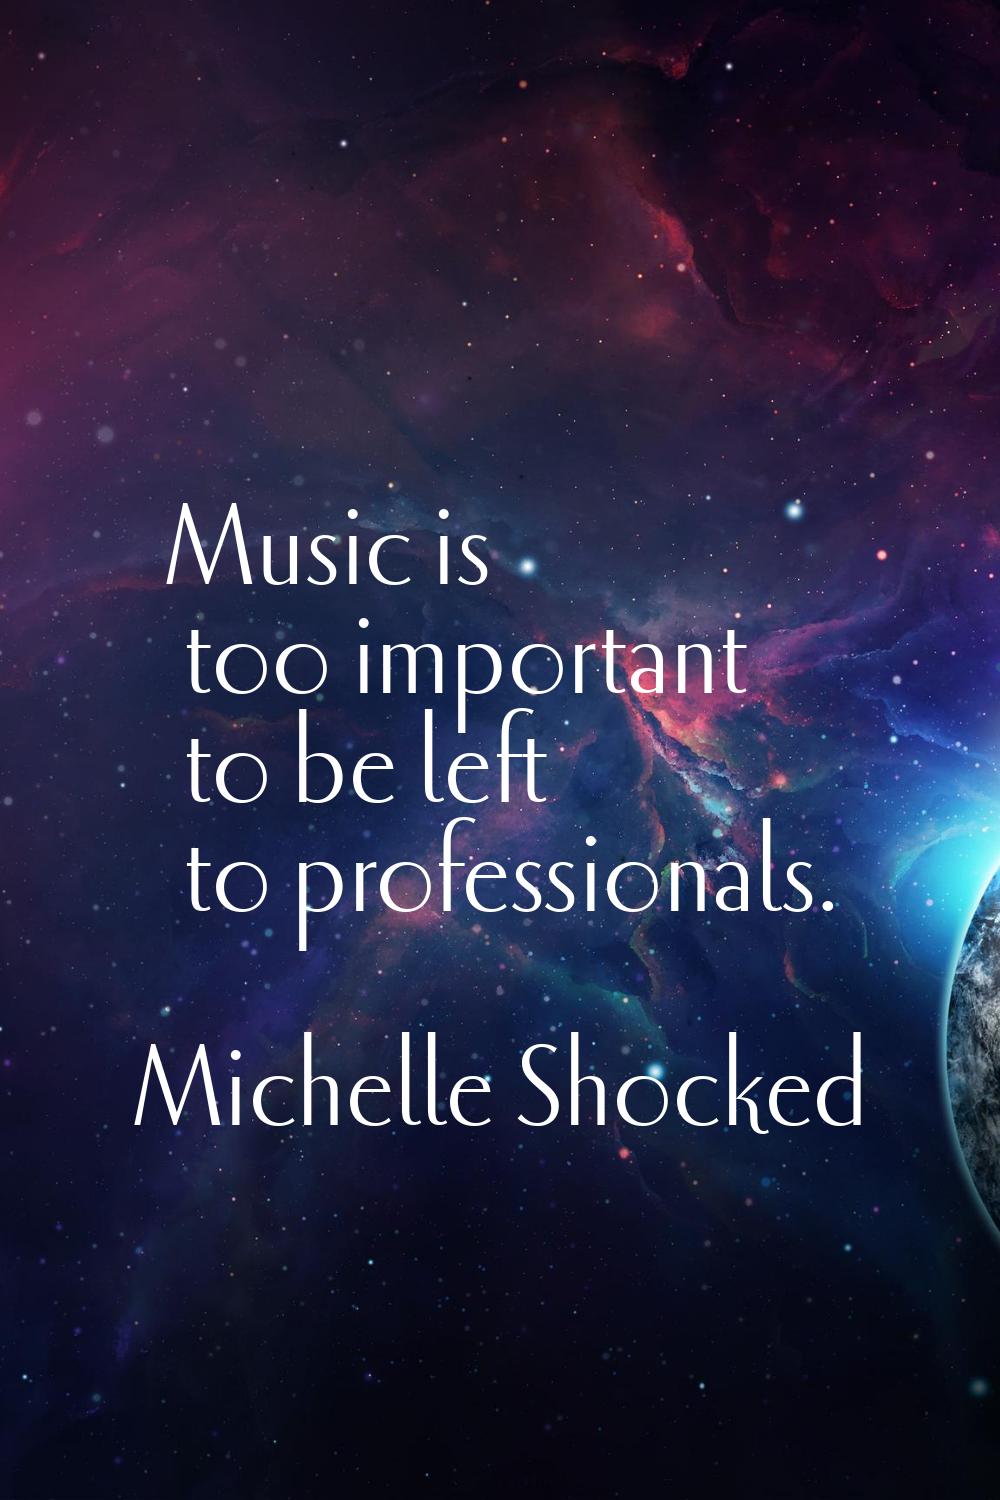 Music is too important to be left to professionals.